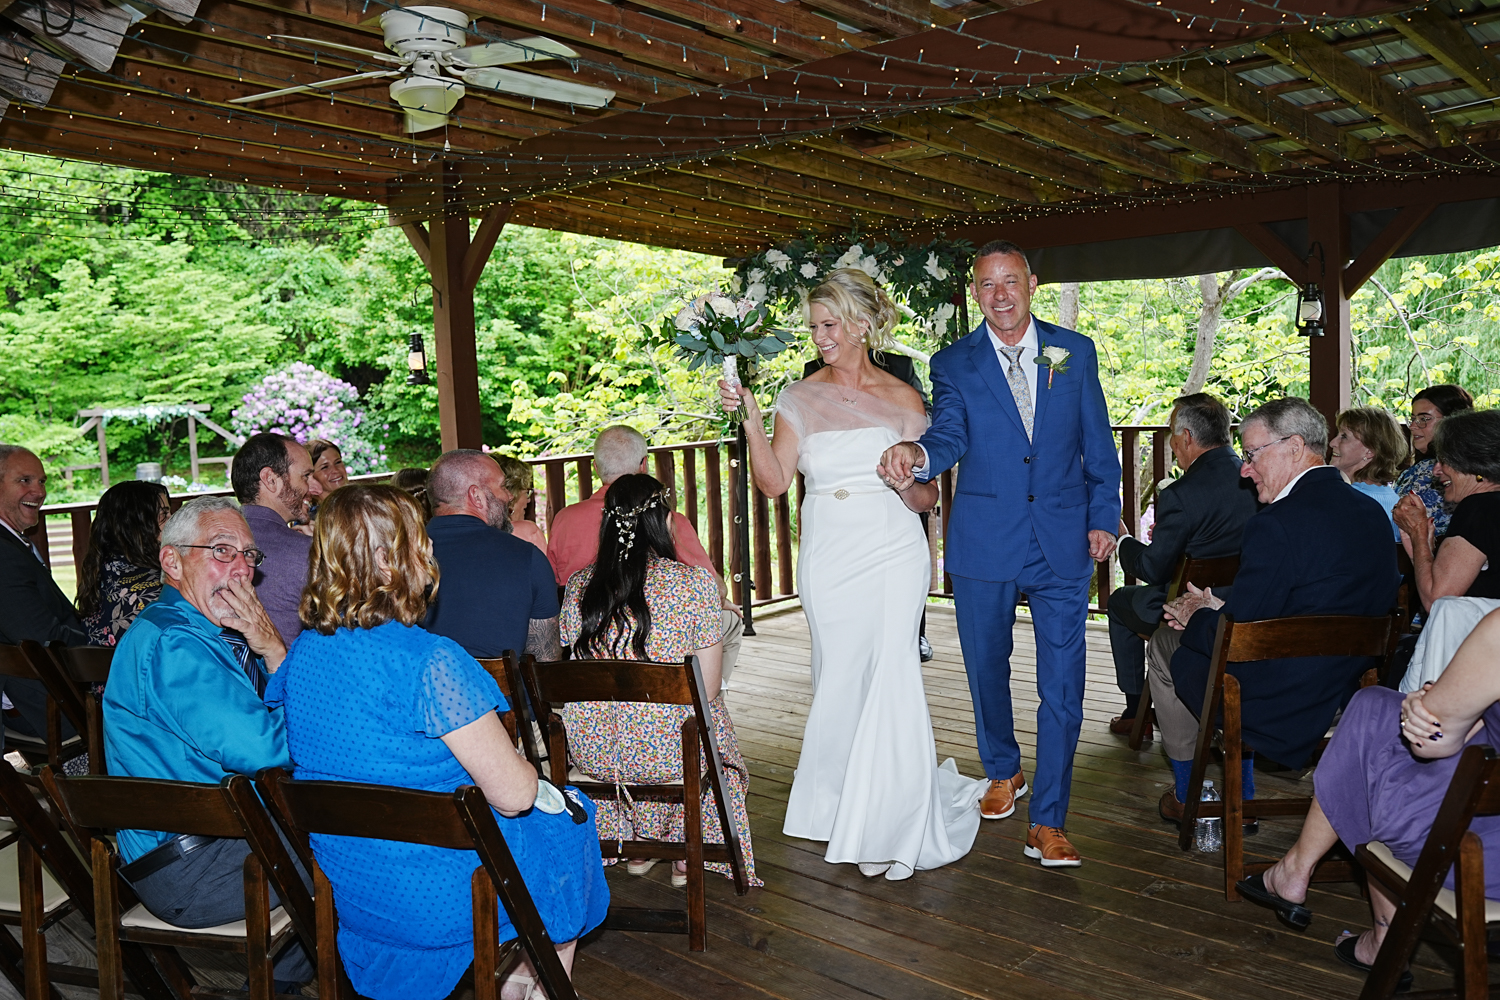 Wedding recessional under a covered pavilion in the spring